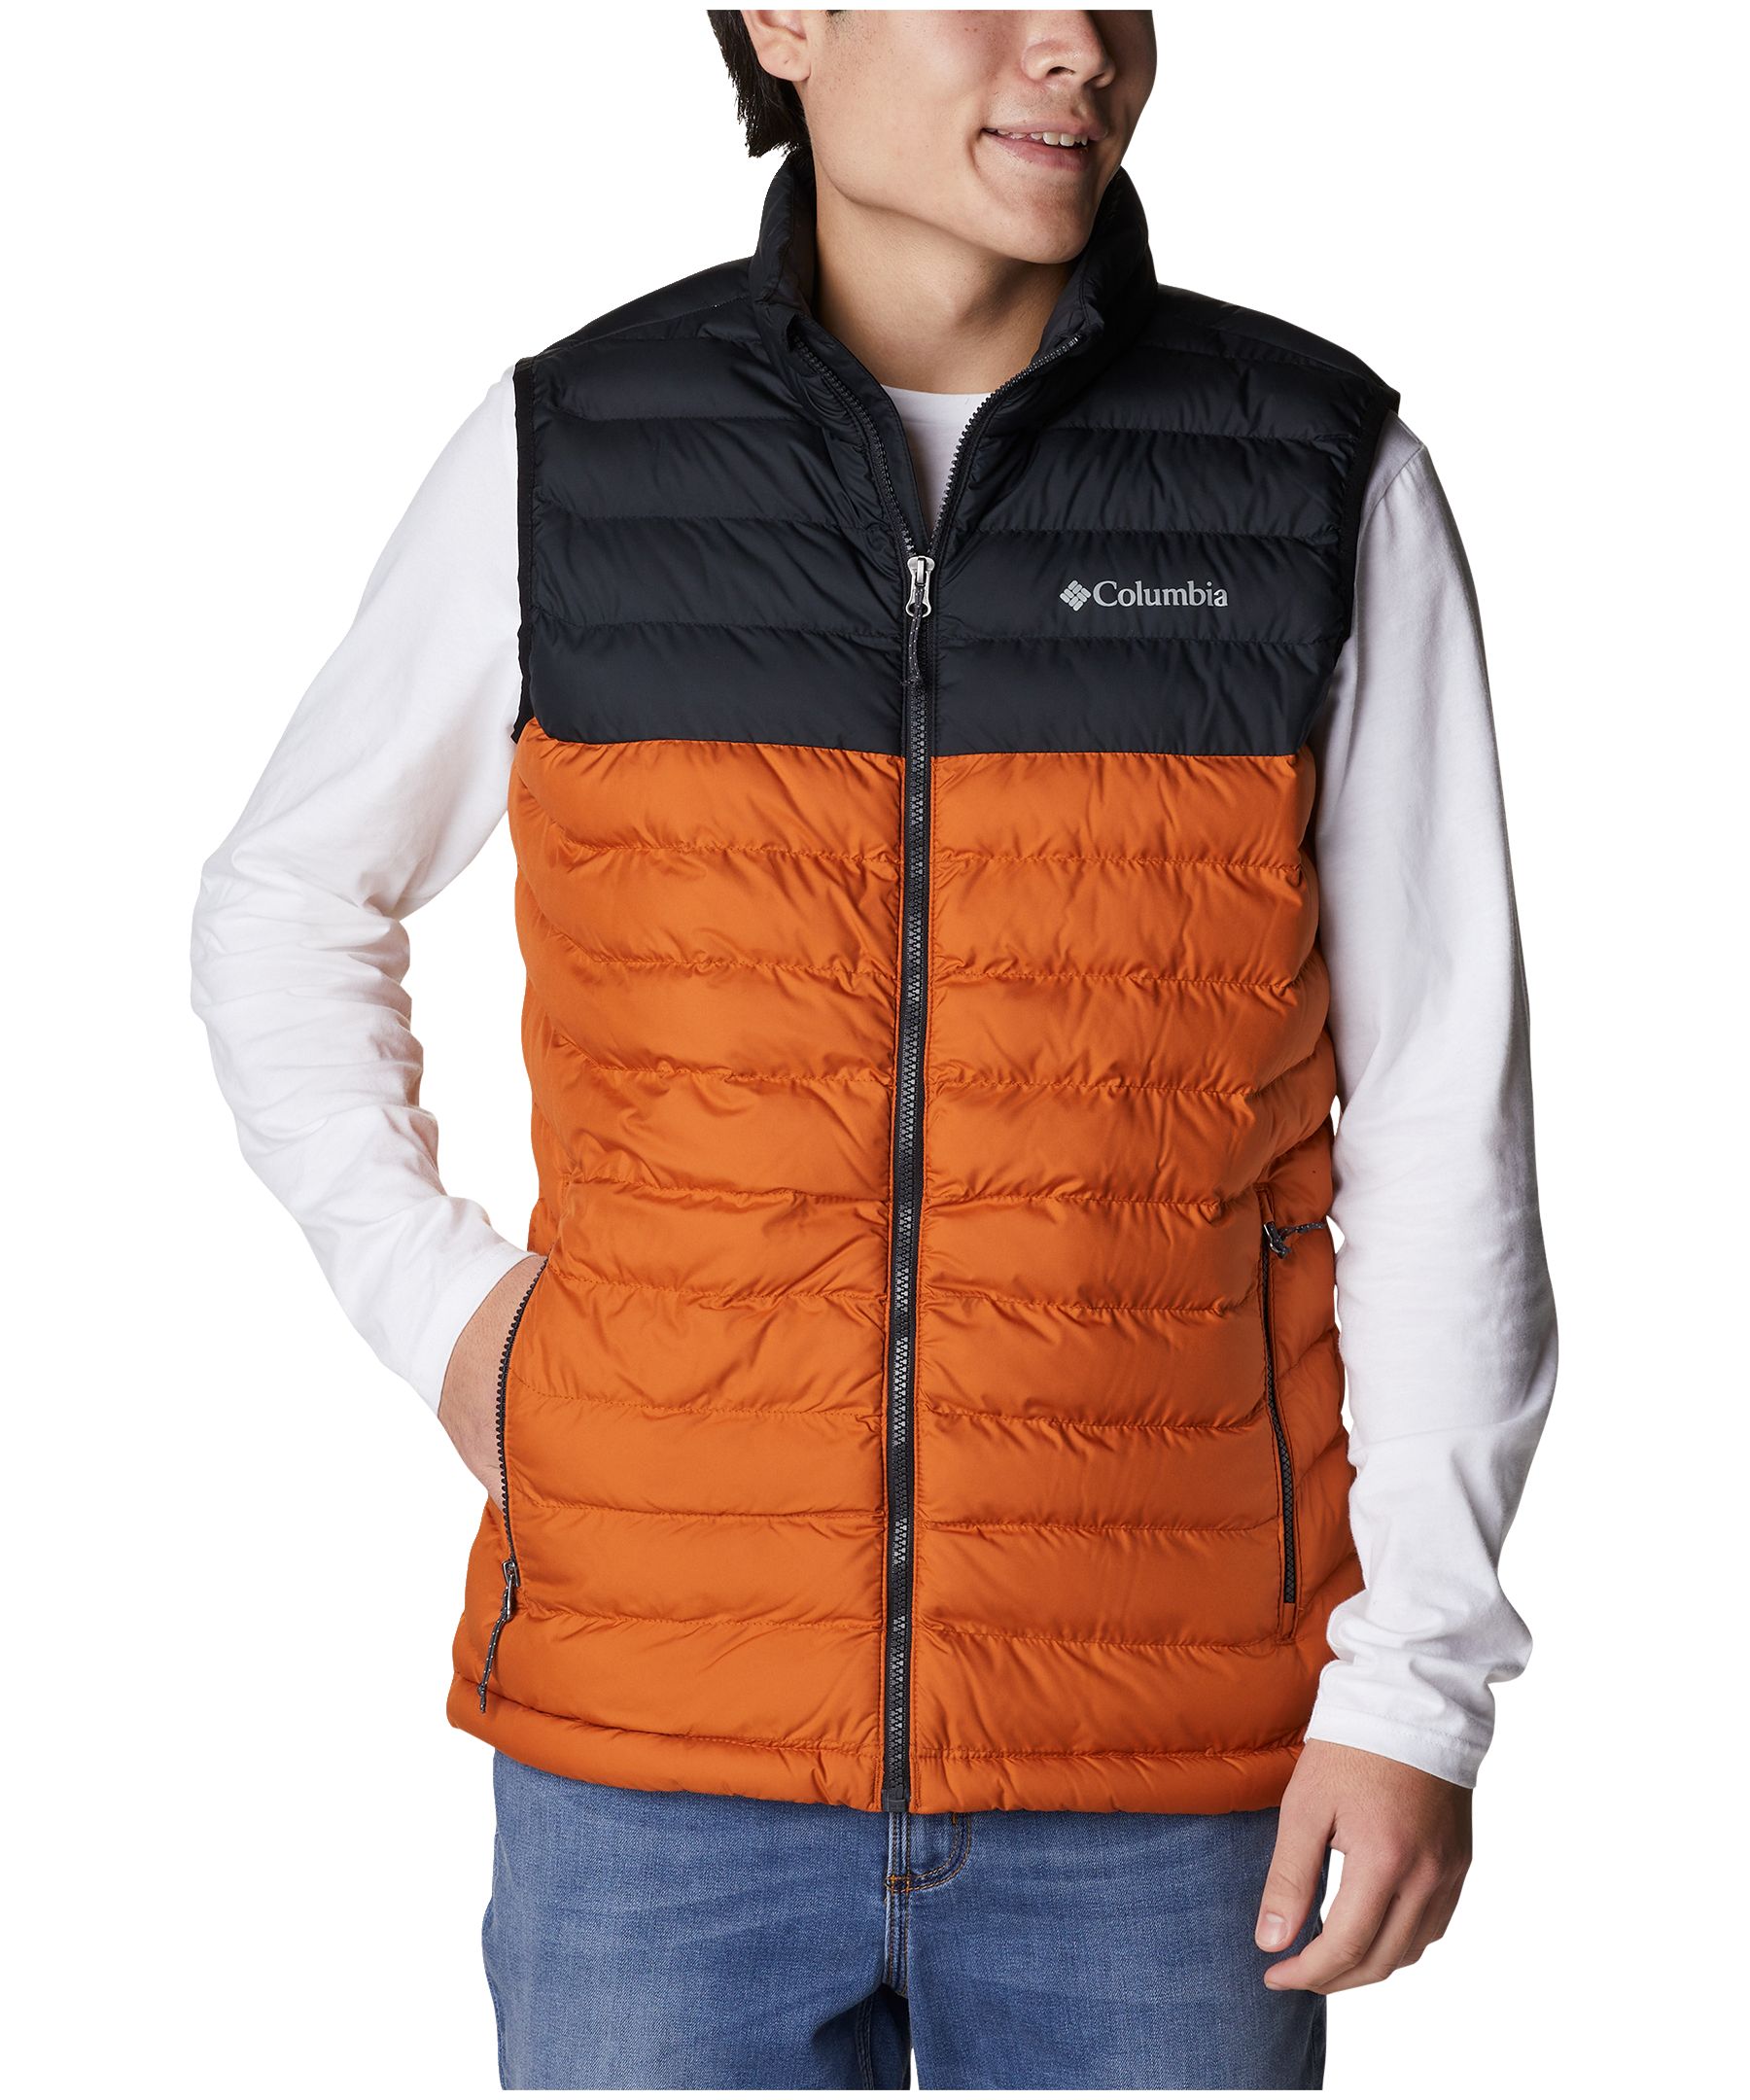 https://media-www.marks.com/product/marks-work-wearhouse/mens-world/mens-outerwear/410034493882/columbia-men-s-powder-lite-water-resistant-omni-heat-insulated-vest-jacket-c30a4afe-644c-4c5c-8518-955bfa94f8af-jpgrendition.jpg?imdensity=1&imwidth=1244&impolicy=mZoom